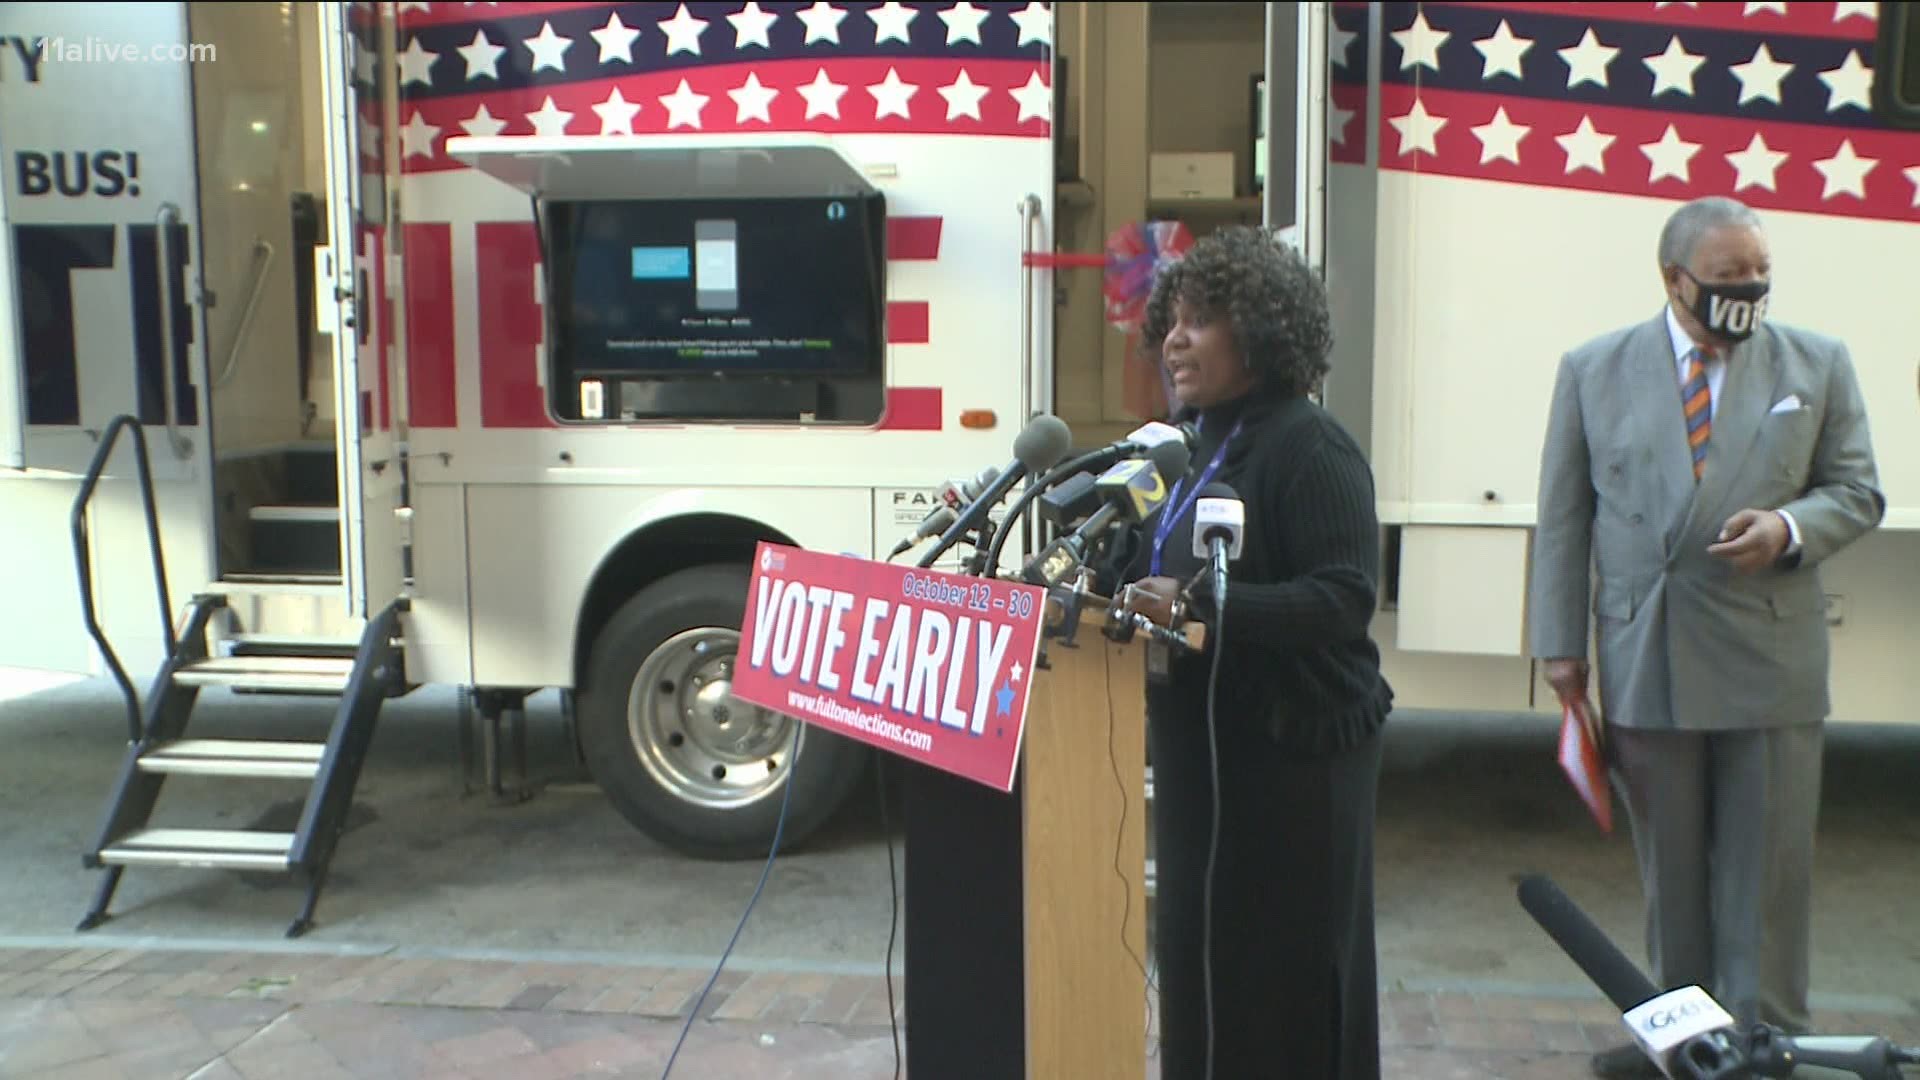 A get-out-the-vote initiative was launched by the county.